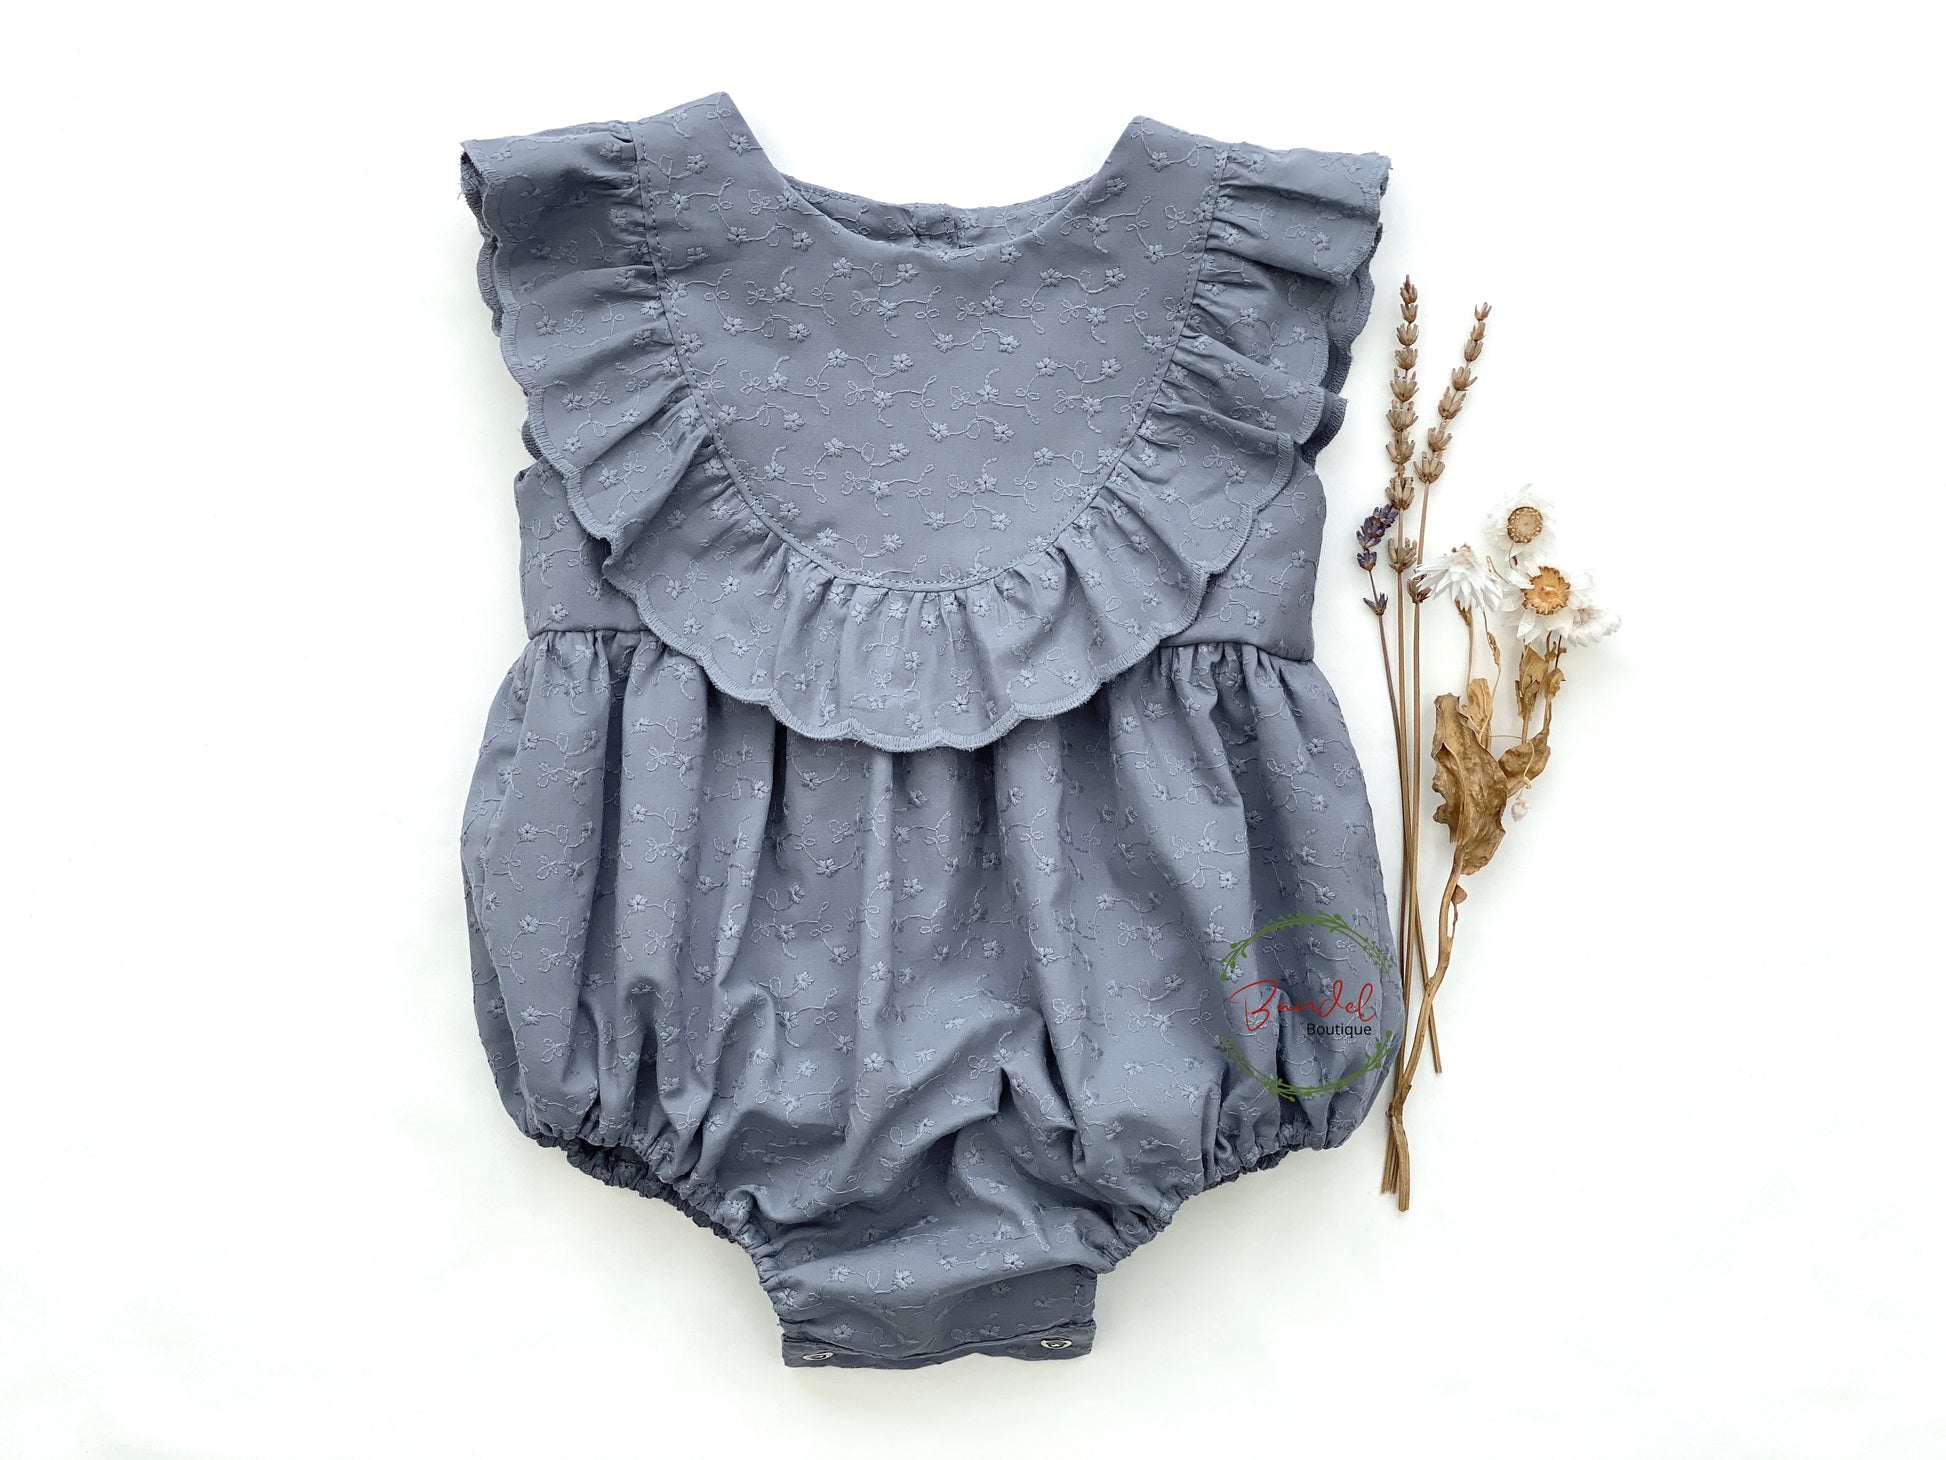 Dusty-Blue Romper is a perfect staple piece for any baby girl's wardrobe. Crafted with soft, breathable fabric, this romper features a delicate embroidery design and a ruffled front bodice. It also includes convenient snap closure at the crotch, making diaper changing and outfit adjustments effortless.